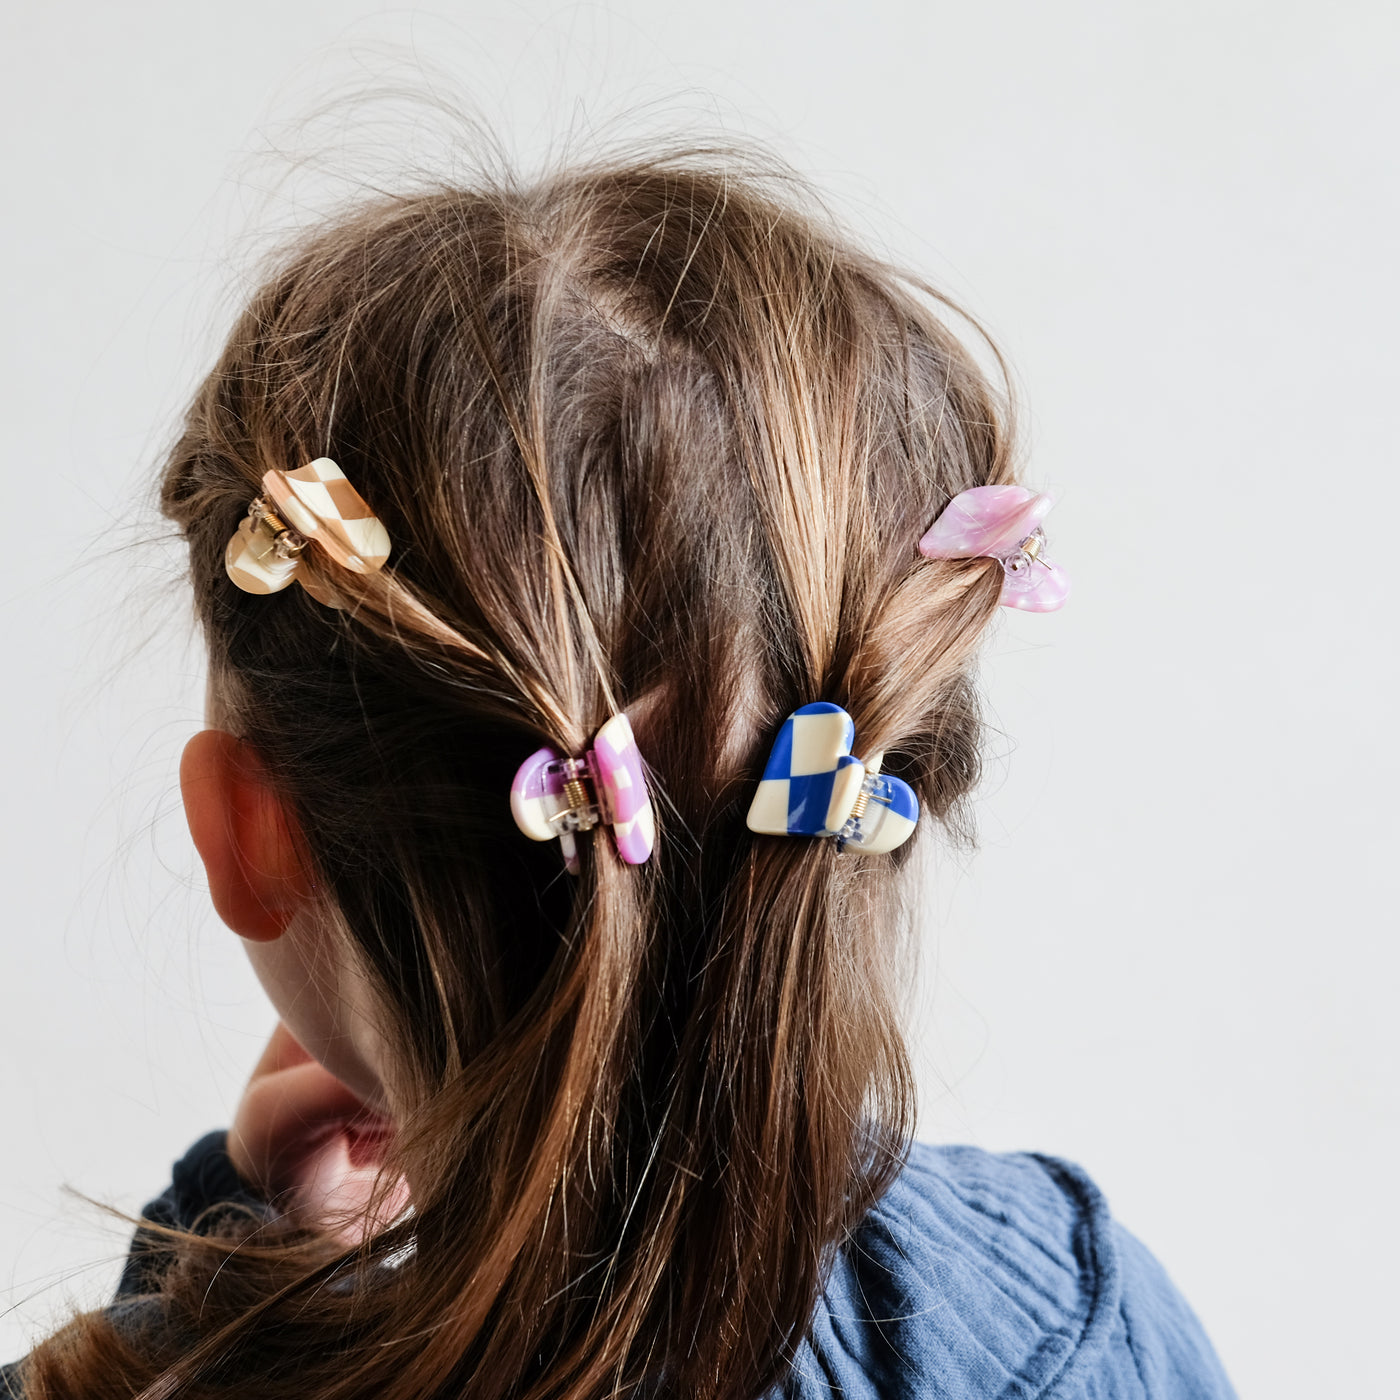 Heart shaped mini bulldog clips in brightly coloured patterns worn by little dark haired girl